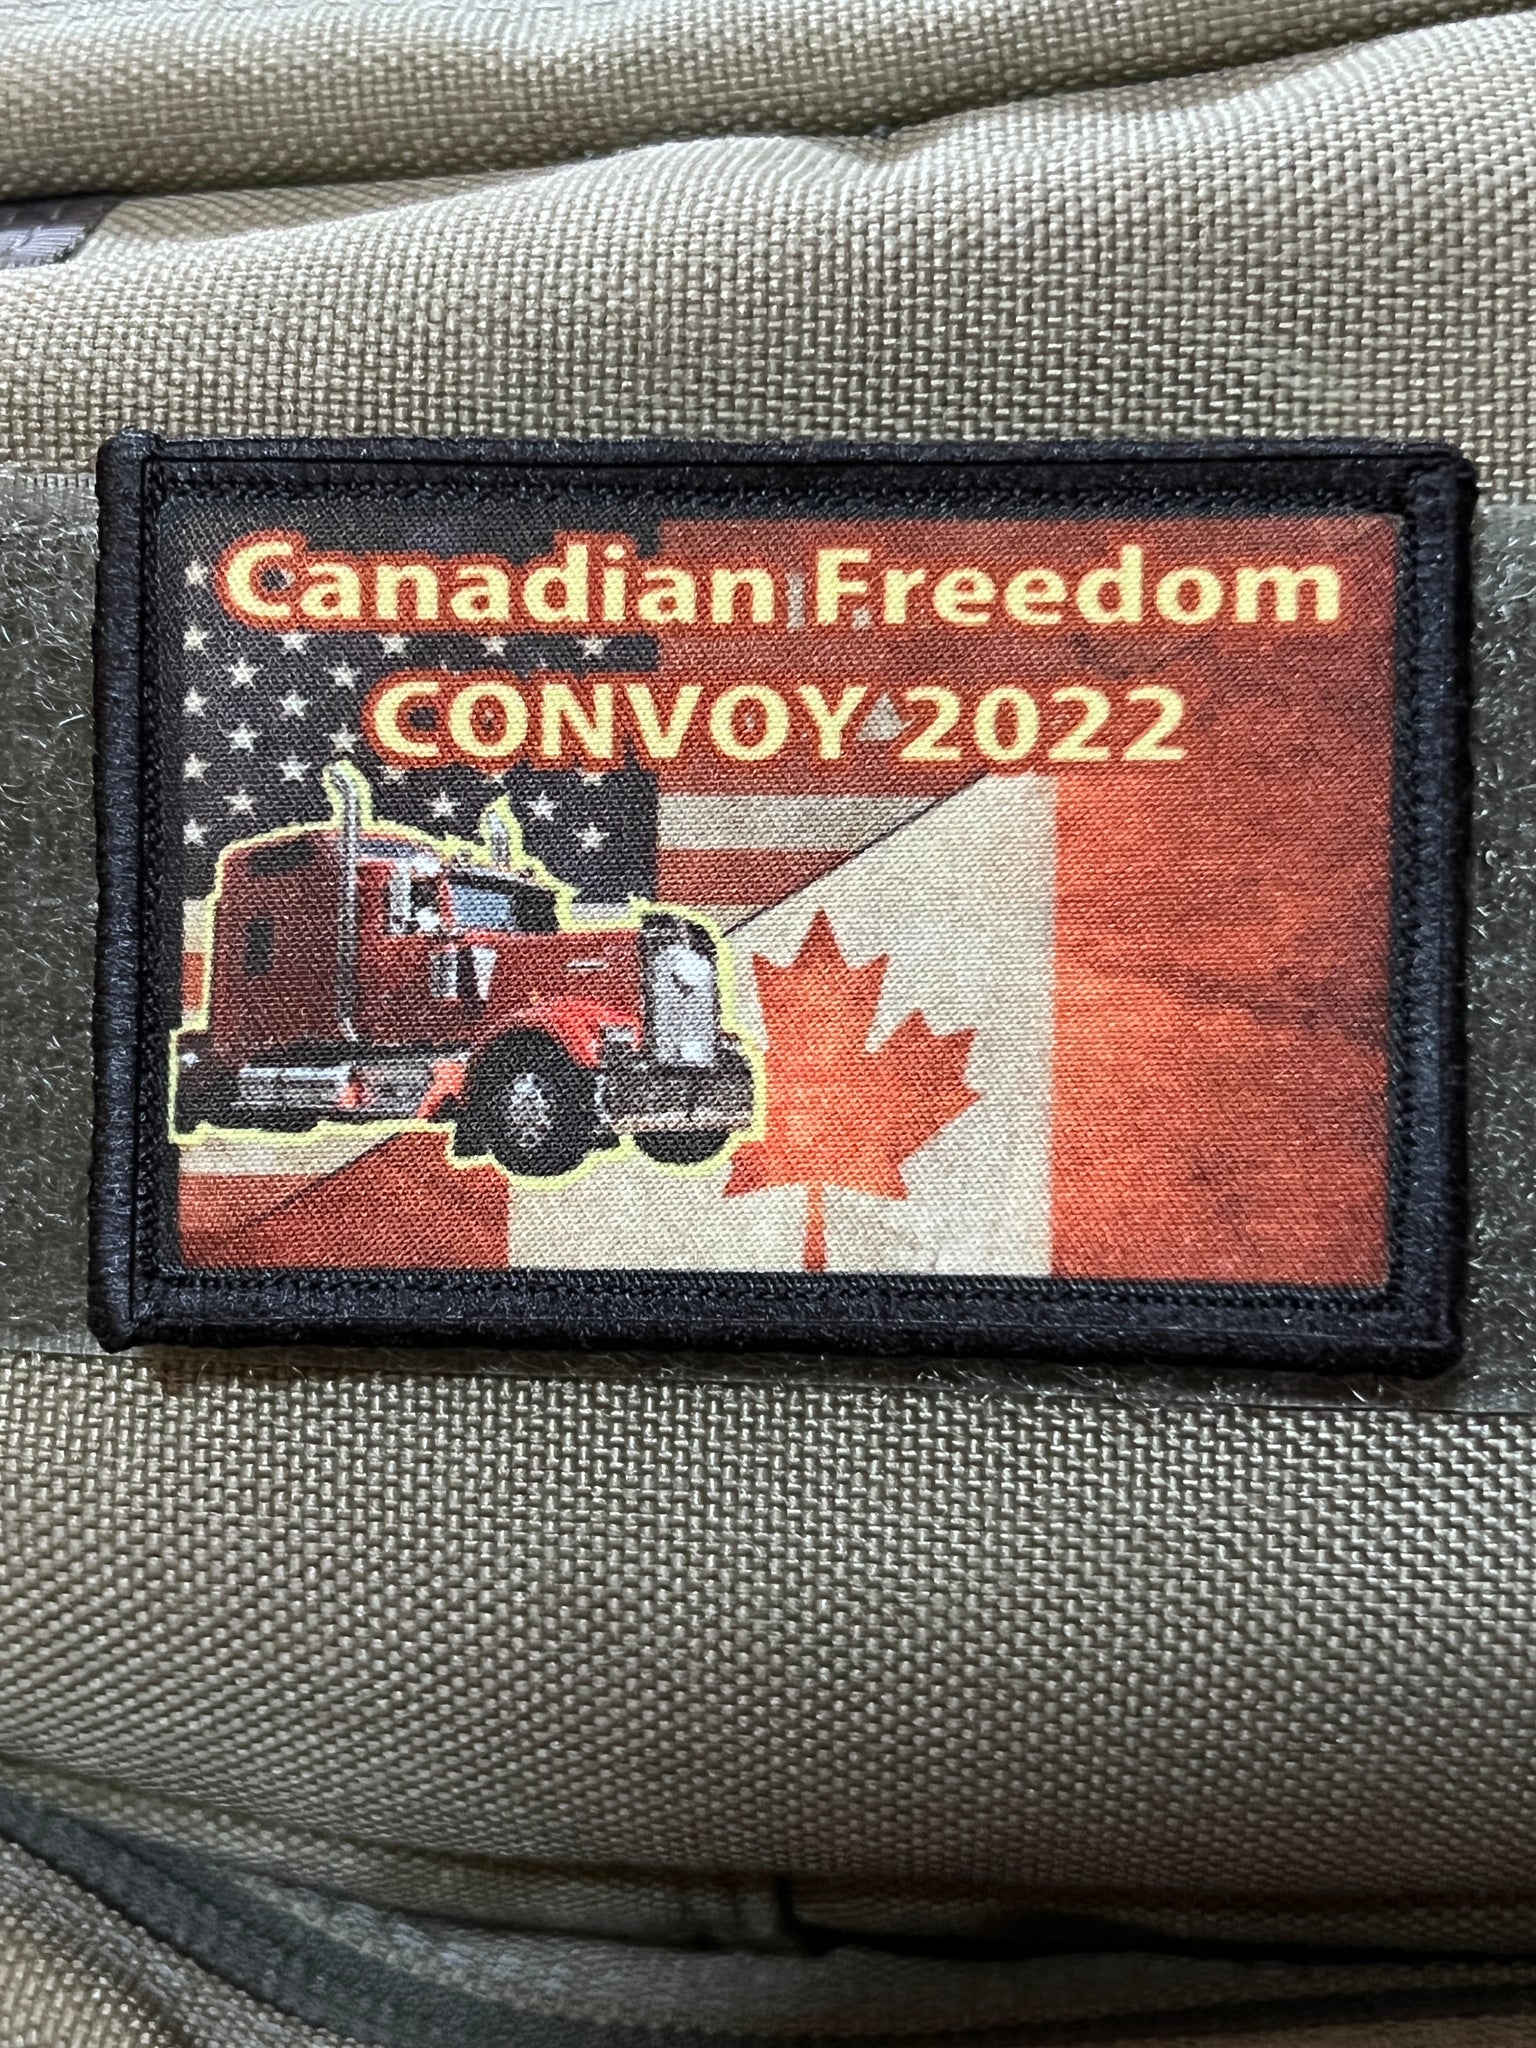 Canadian Freedom Convoy 2022 Morale Patch Morale Patches Redheaded T Shirts 